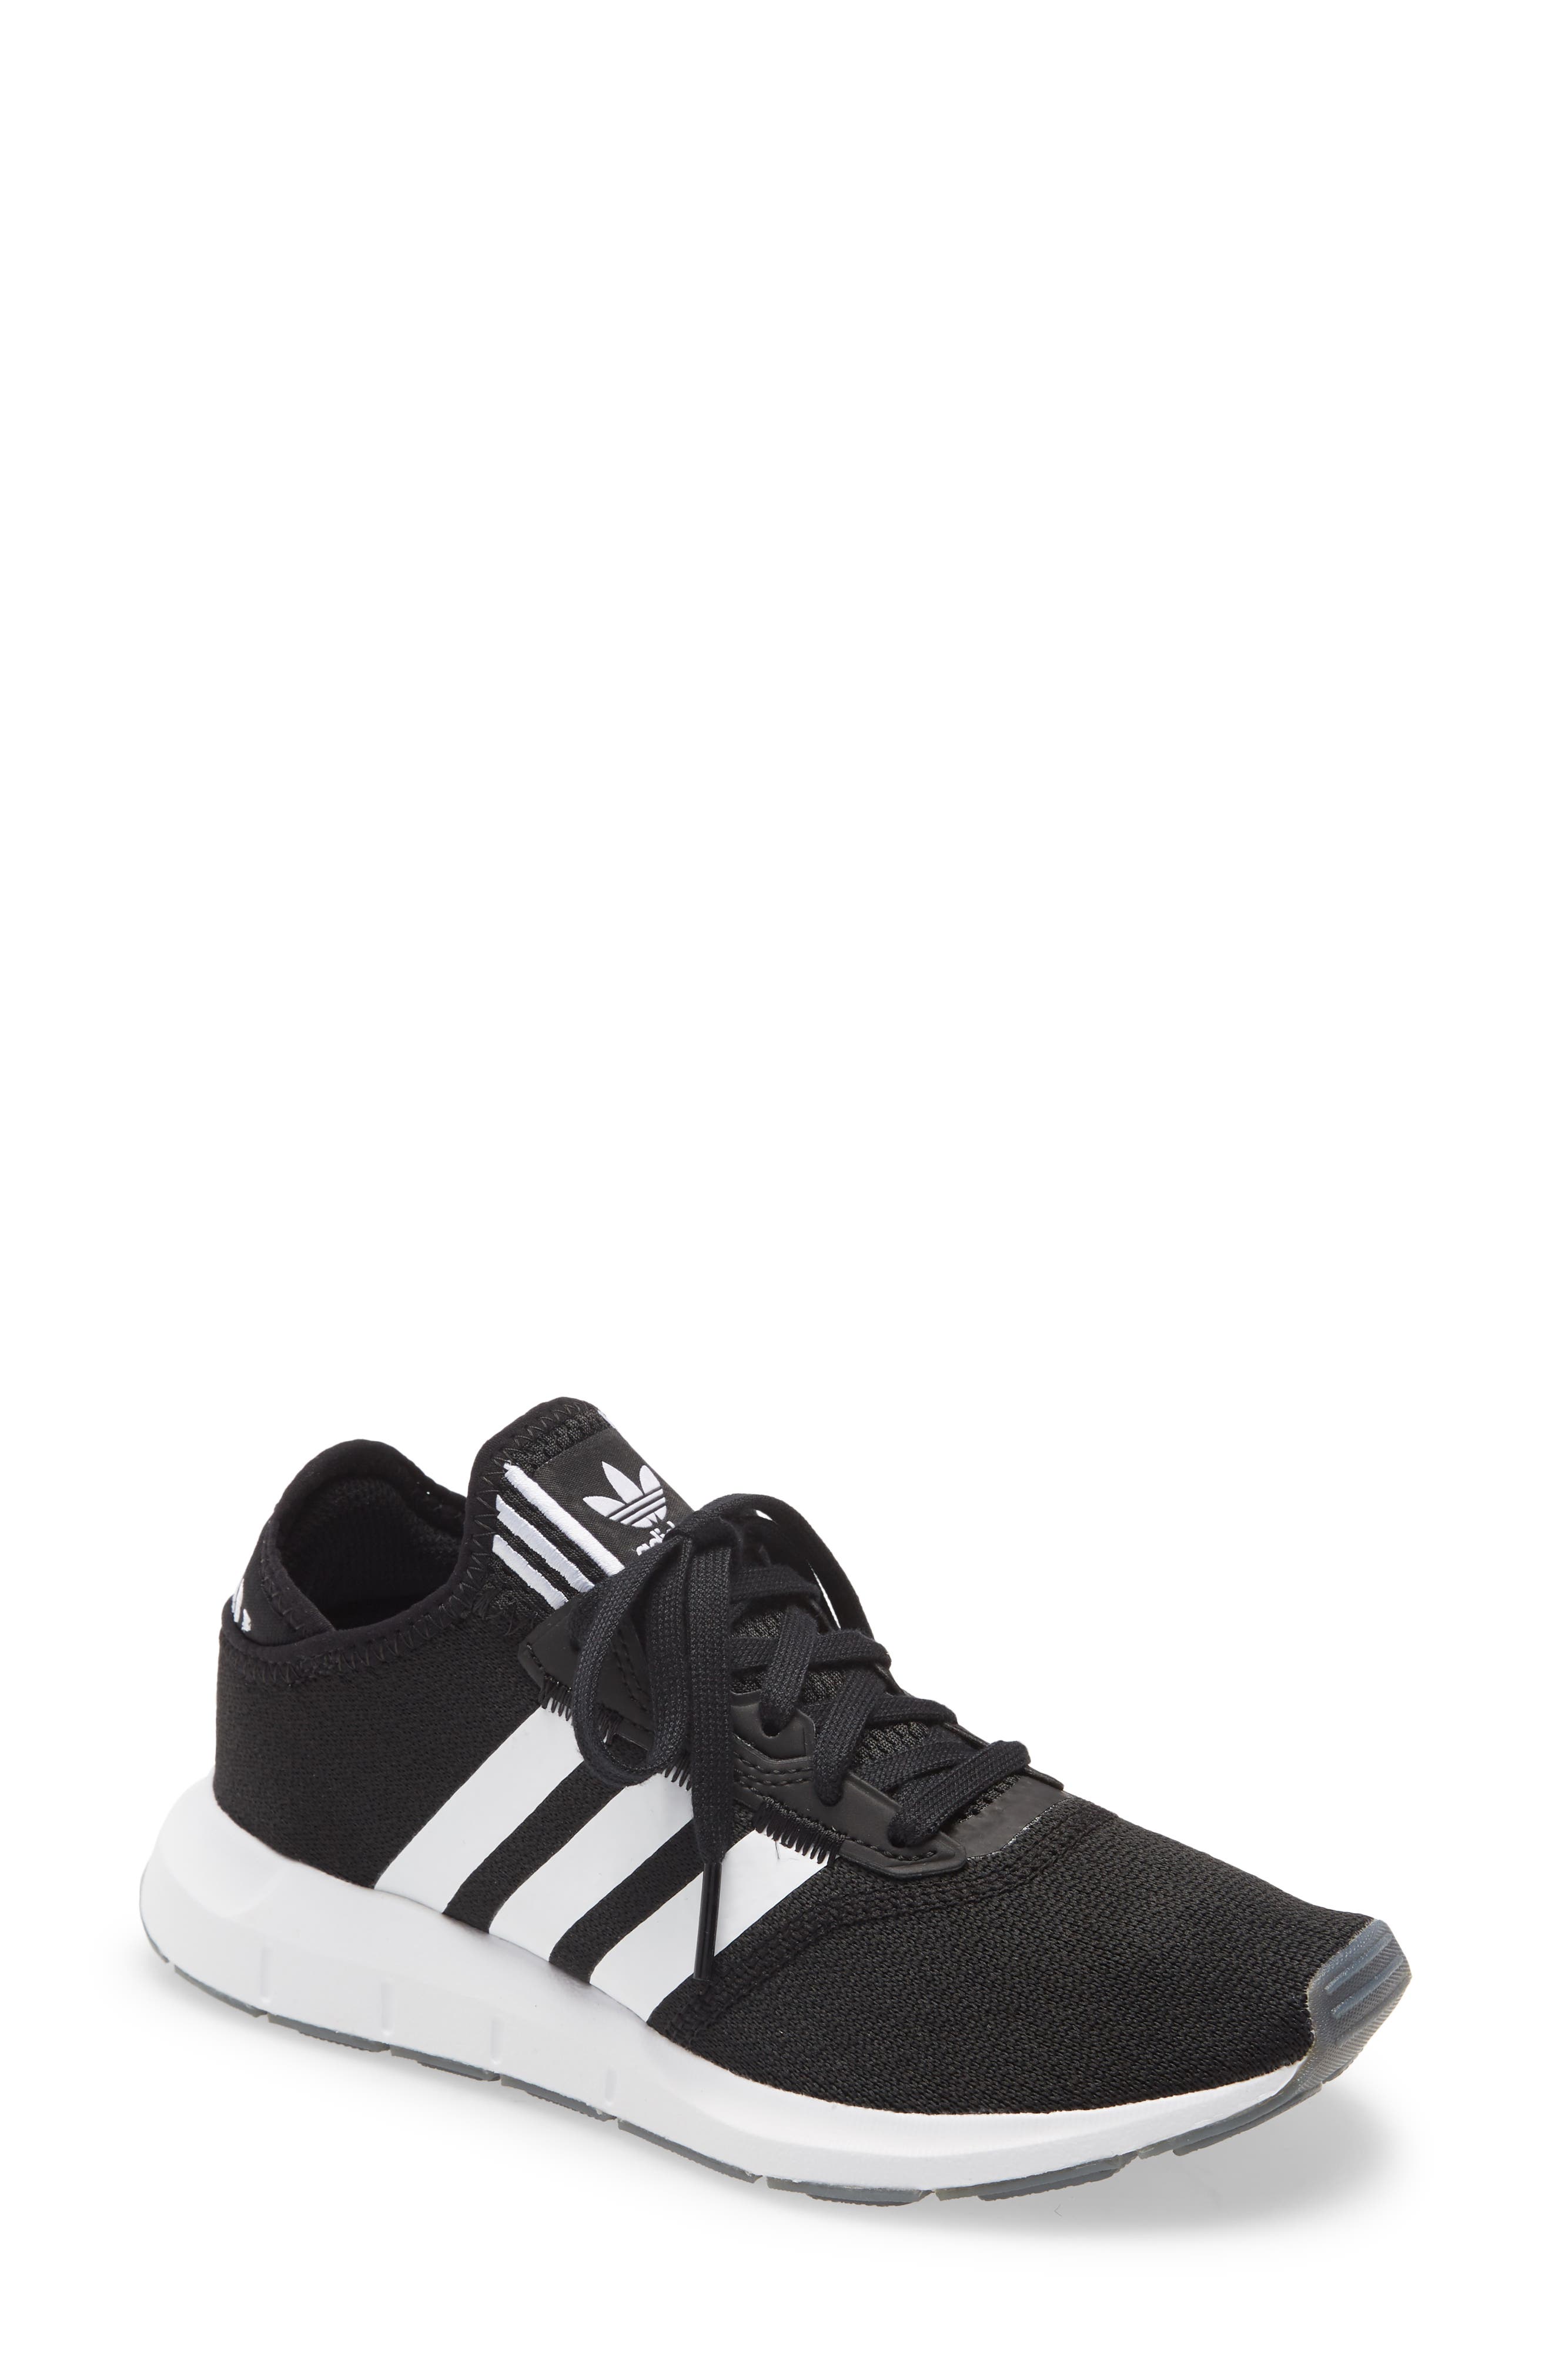 white and black adidas shoes womens